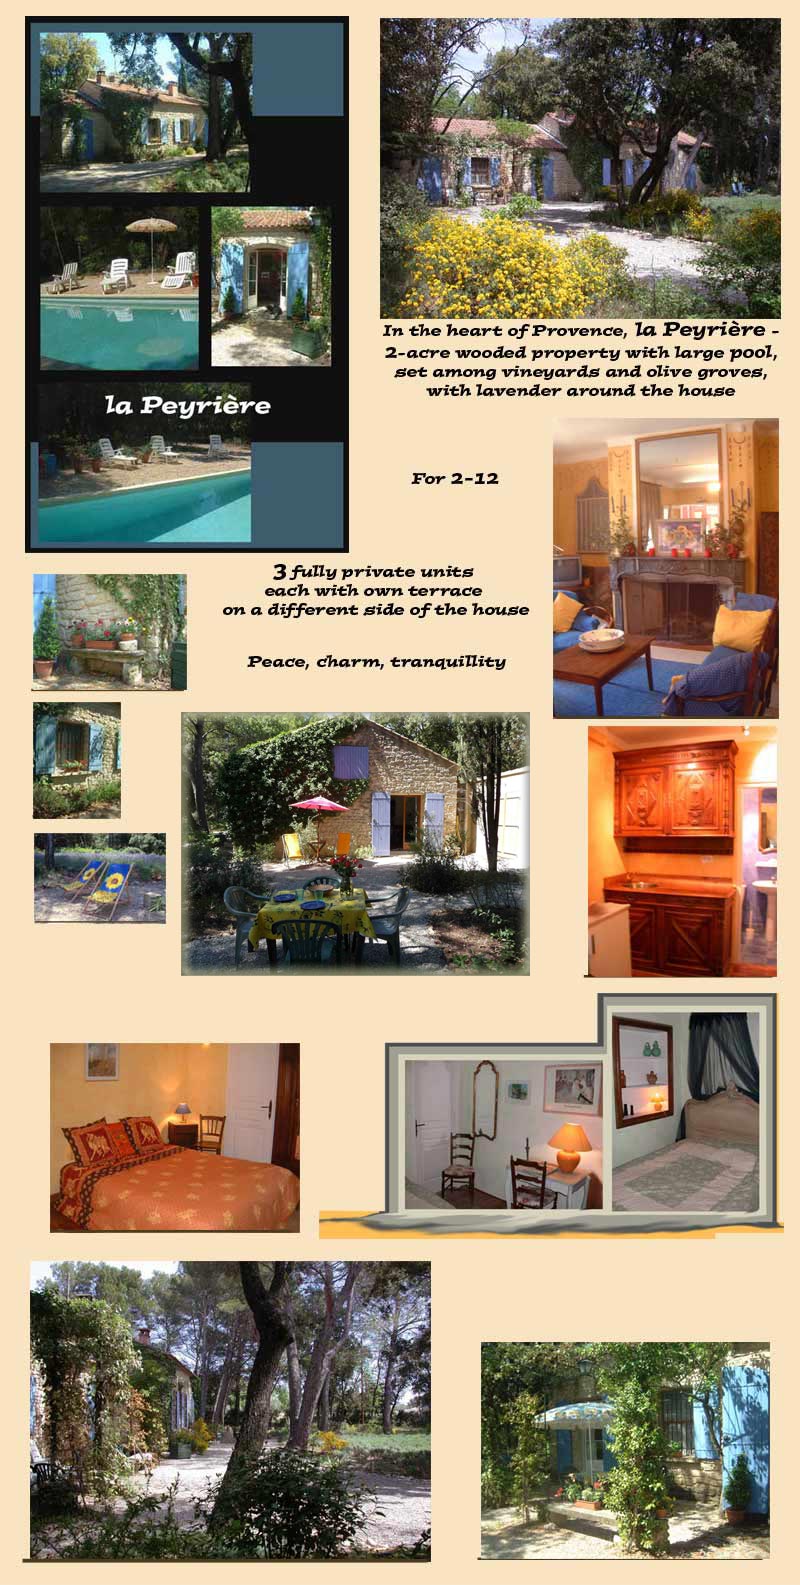 France Provence Rental Vacation pool air conditioned vineyards